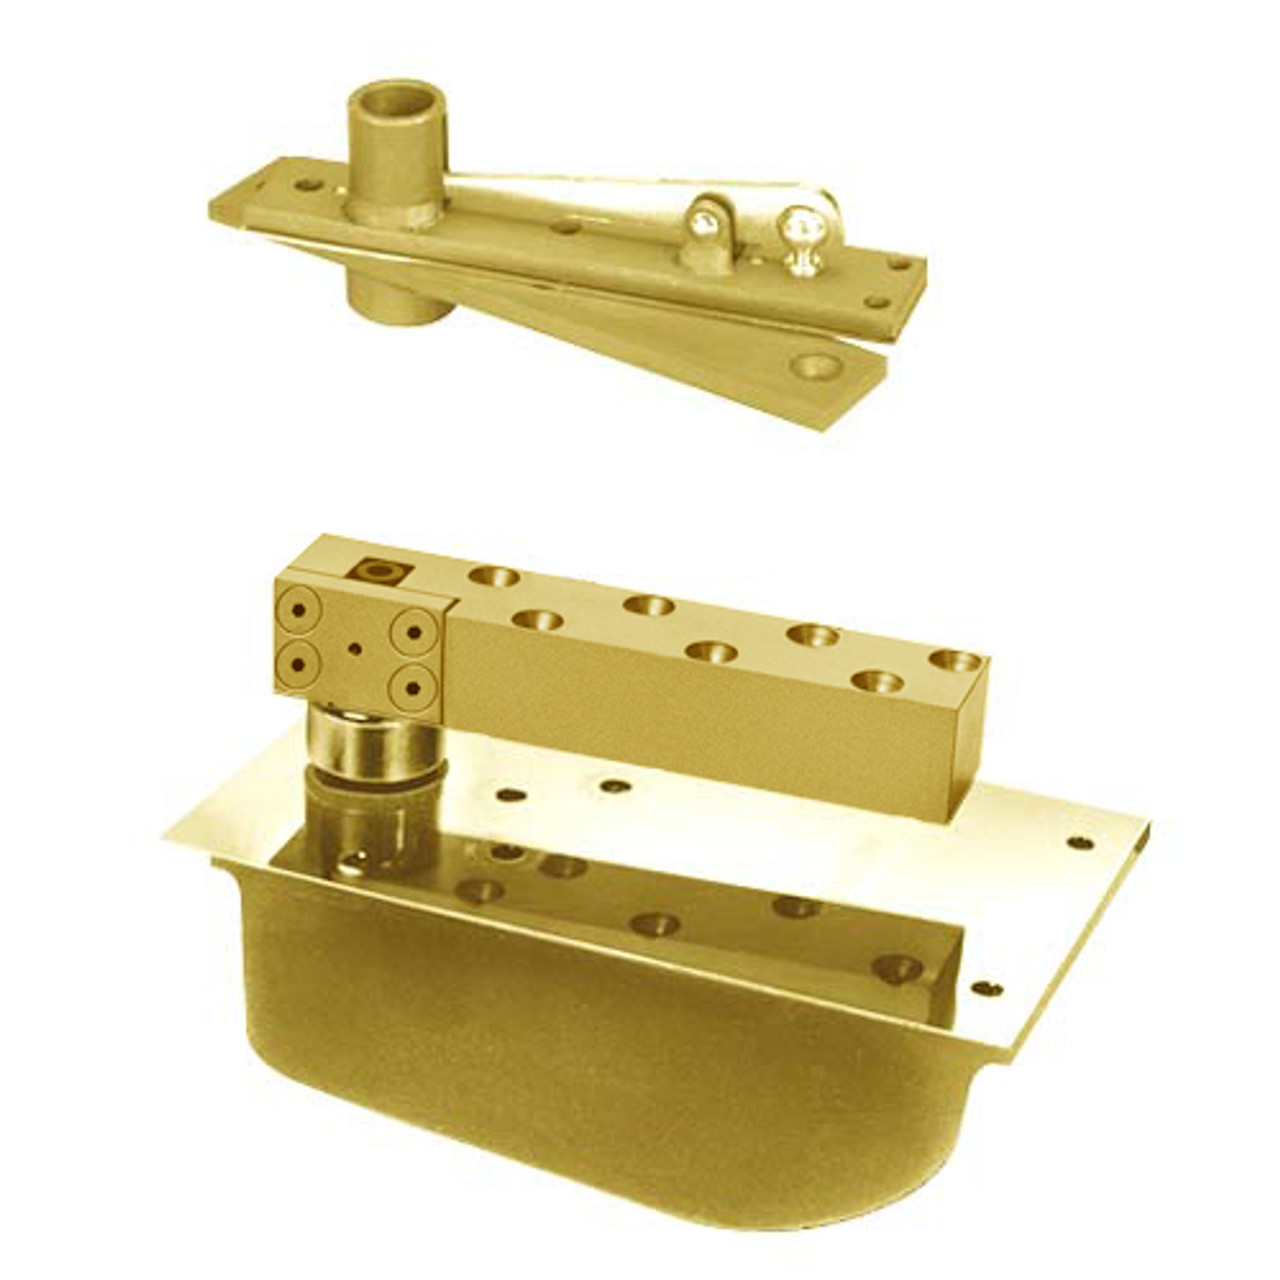 H28-95N-587-RH-606 Rixson 28 Series Extra Heavy Duty Single Acting Center Hung Concealed Floor Closer in Satin Brass Finish